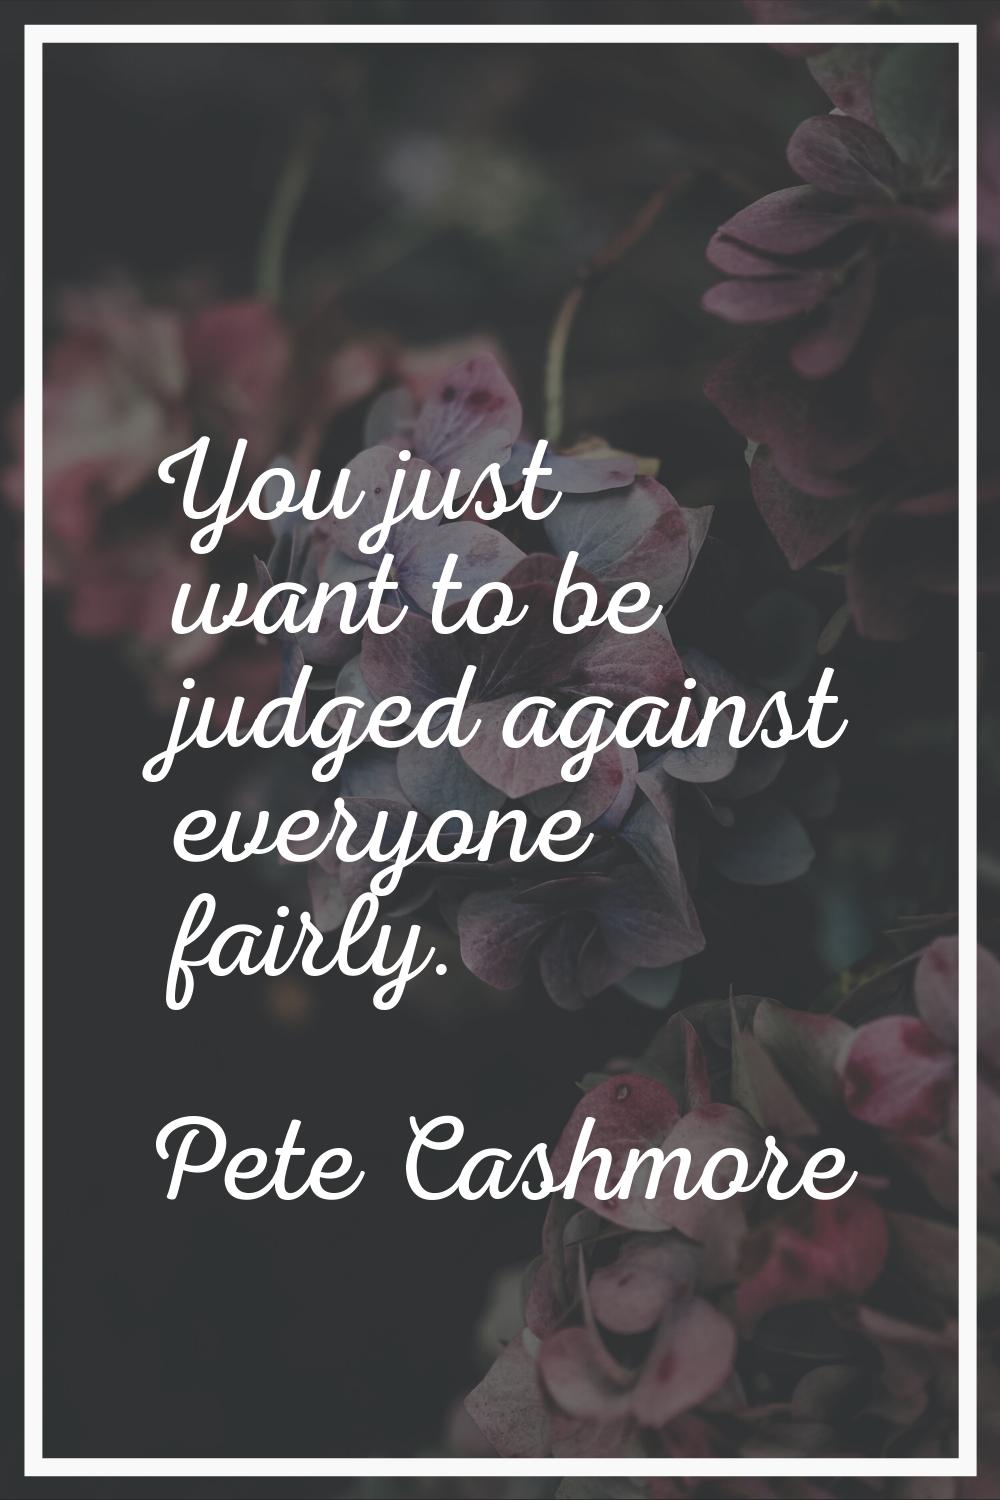 You just want to be judged against everyone fairly.